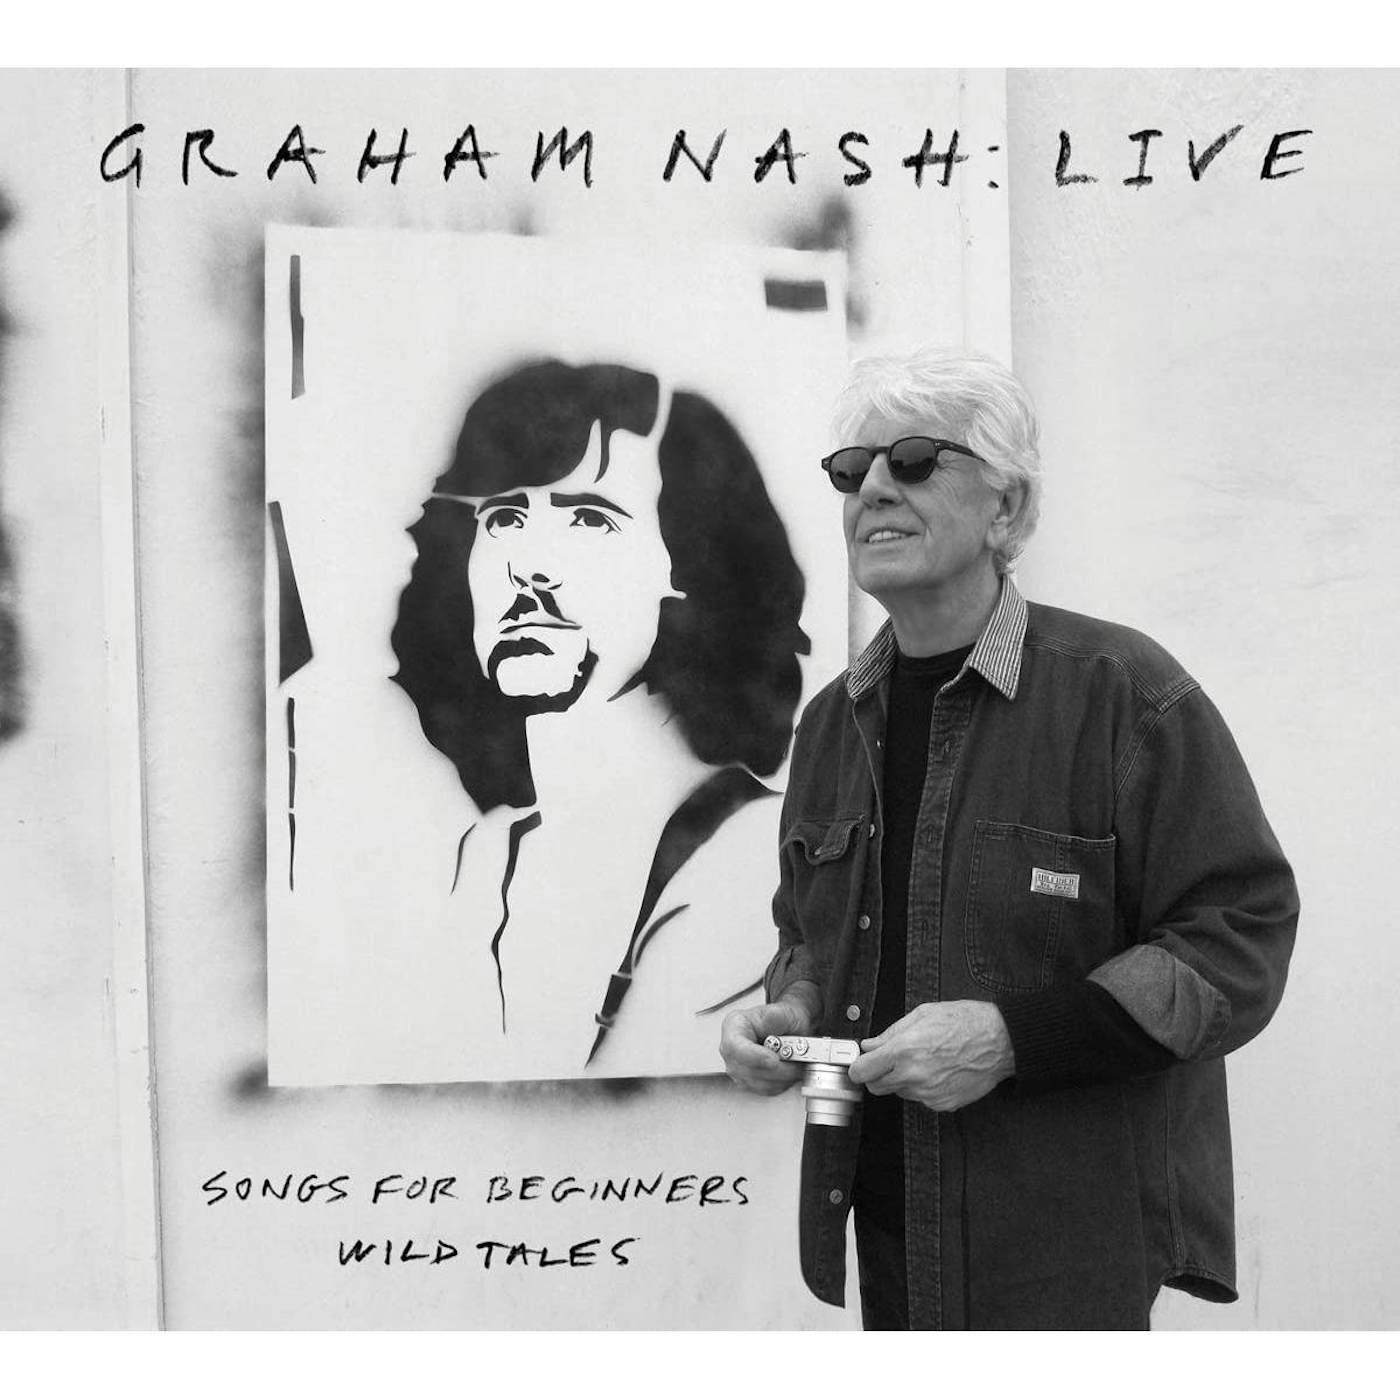 Graham Nash Live Songs For Beginners, Wild Tales (2LP) Vinyl Record